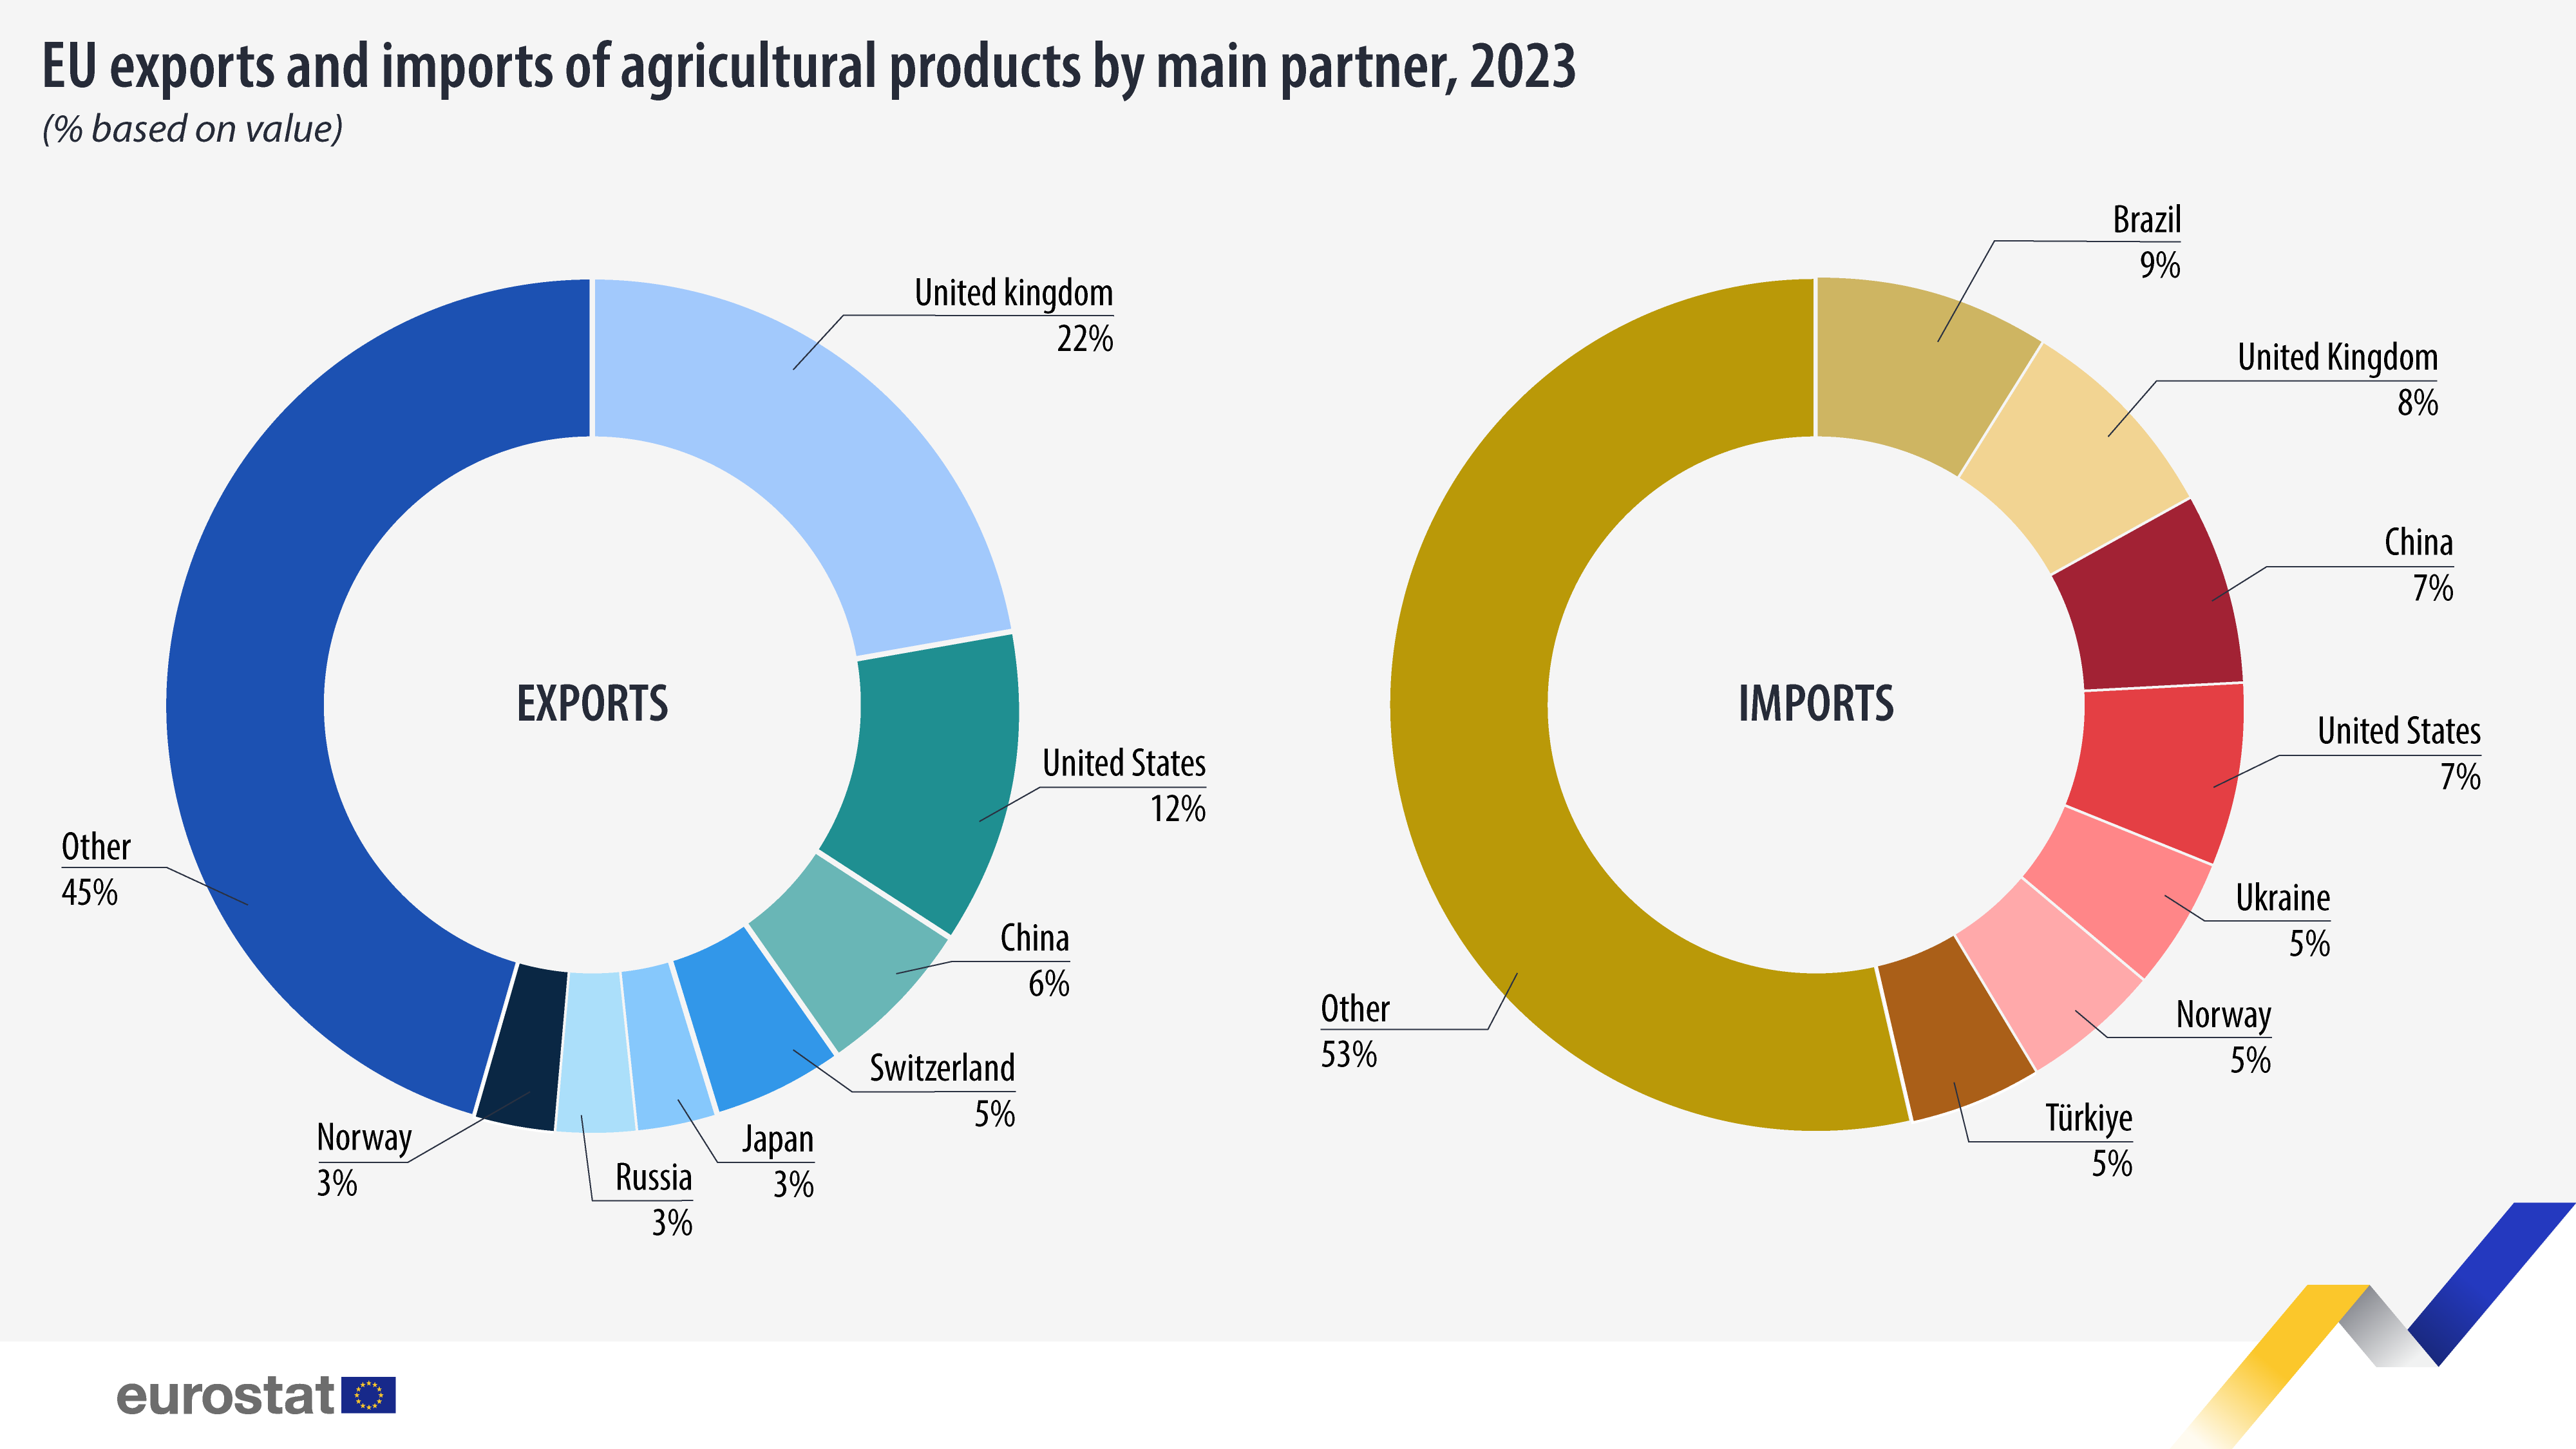 EU exports and imports of agricultural products by main partner, % based on value, 2023. Infographic. See link to full dataset below.